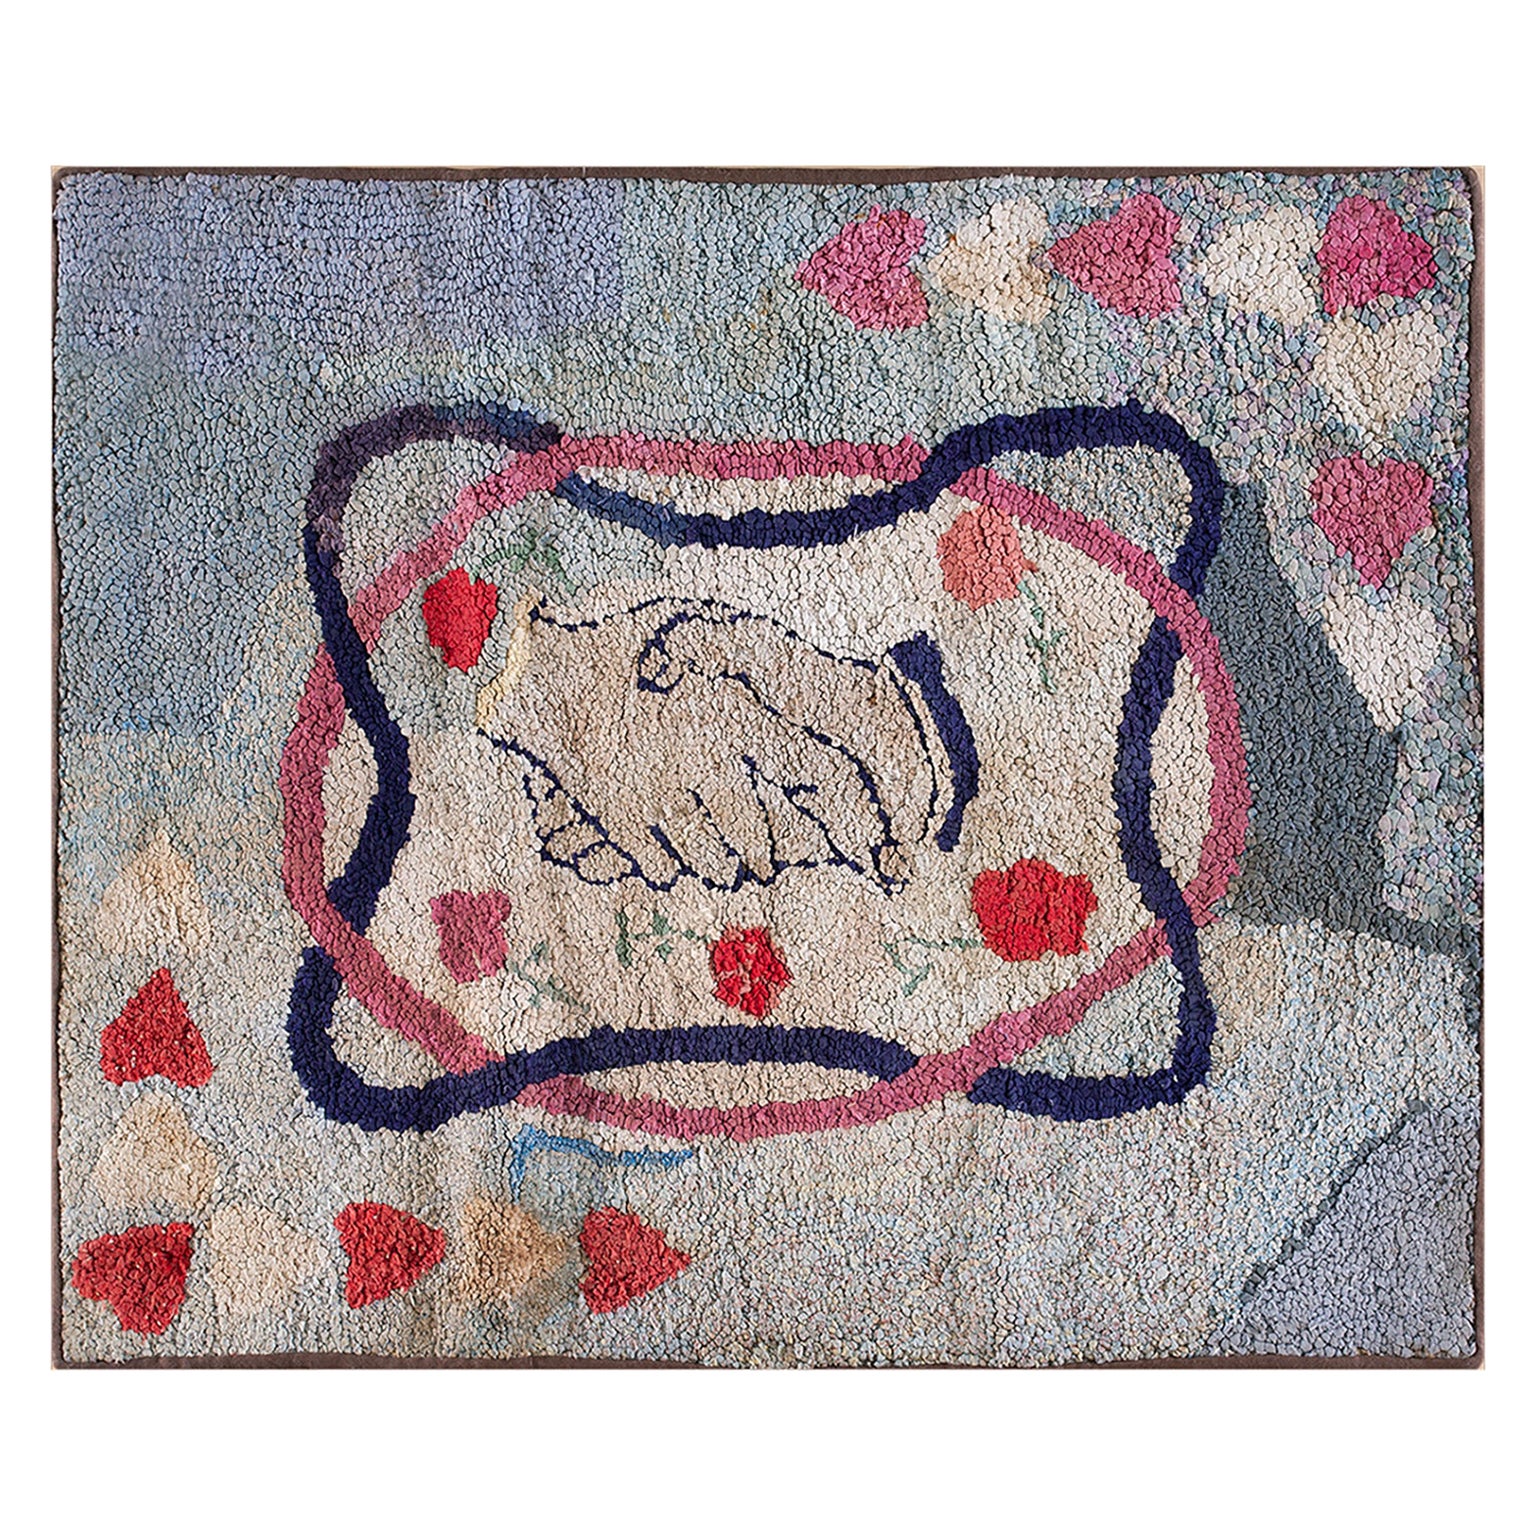 Early 20th Century American Hooked Rug ( 2'9" x 3'4" - 84 x 102 ) For Sale